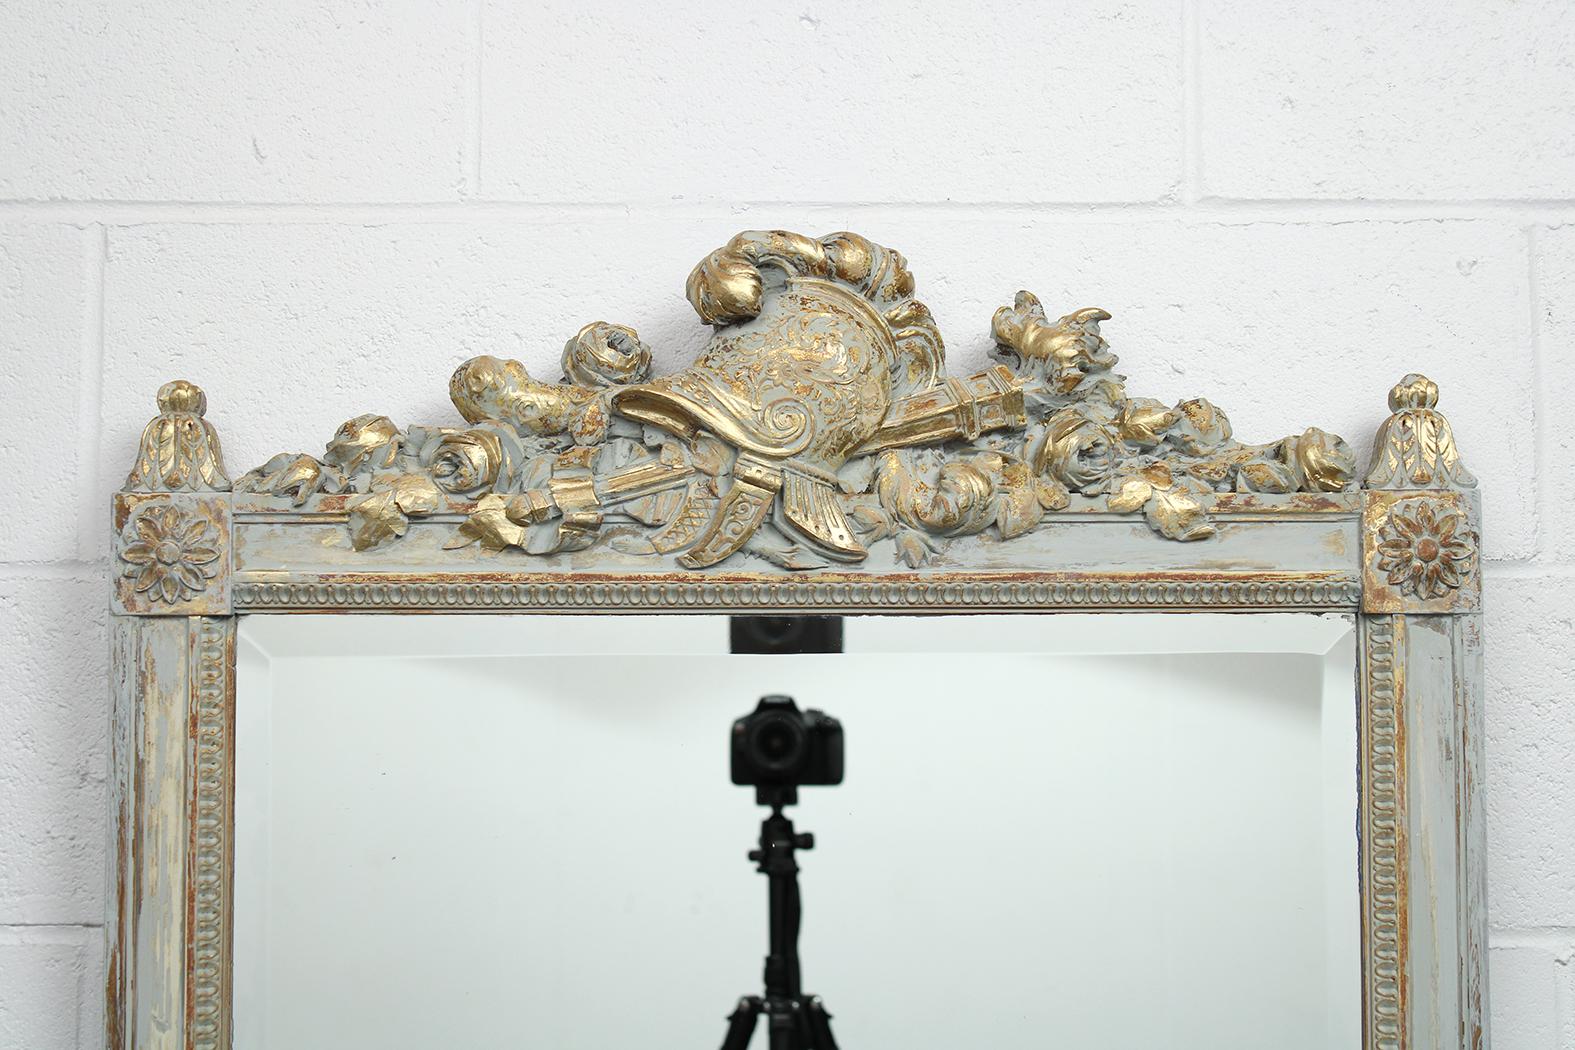 This French antique Louis XVI style wall mirror is in good condition and has been newly painted in a grey and white color combination with a distressed finish. The mirror features remarkable carved details along the top depicting a decorative